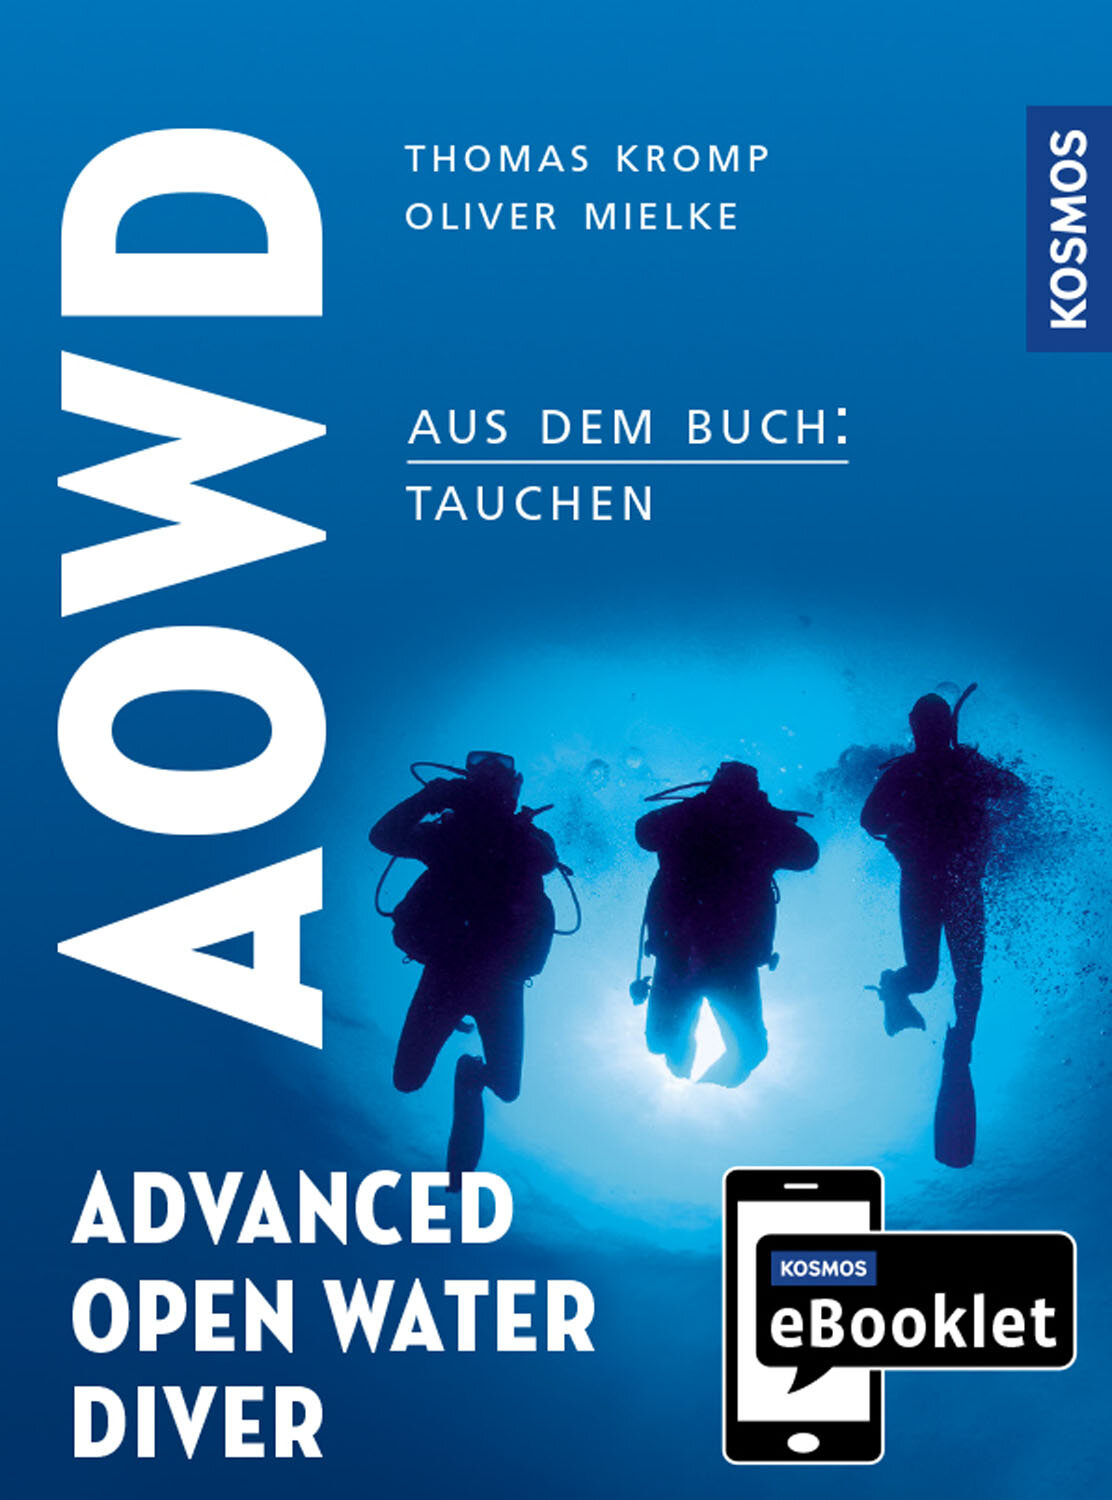 KOSMOS eBooklet: Advanced Open Water Diver (AOWD)